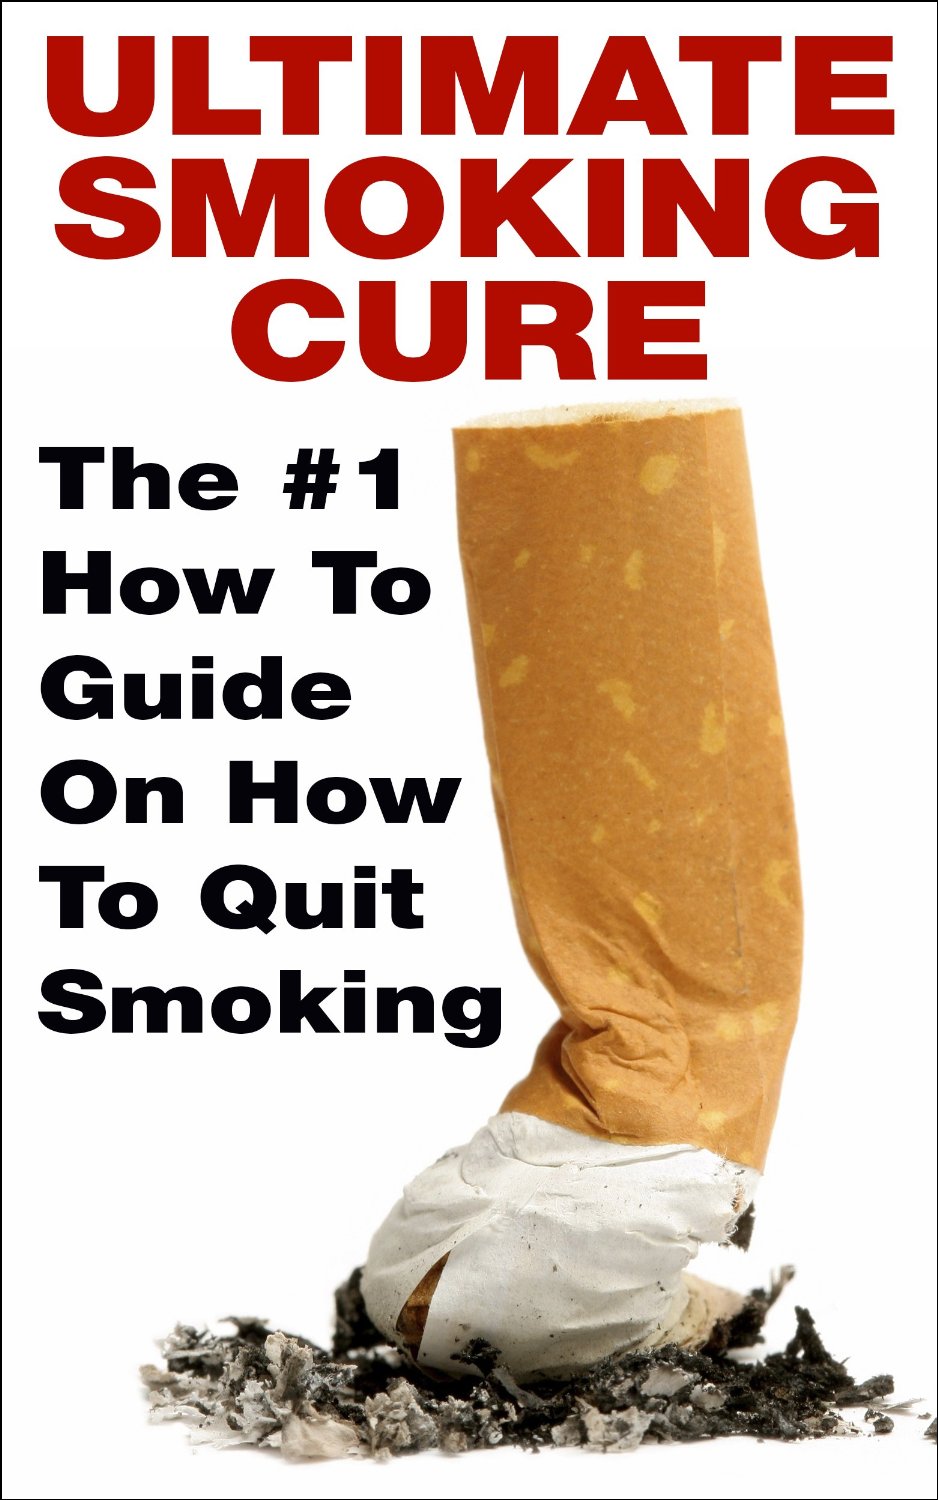 Smoking; Ultimate Smoking Cure: The #1 How To Guide On How To Quit Smoking For Good (Quit Smoking, Smoking Cure, Smoking Remedy, Smoking Treatment, Addiction, Tobacco) by Alicia Taylor